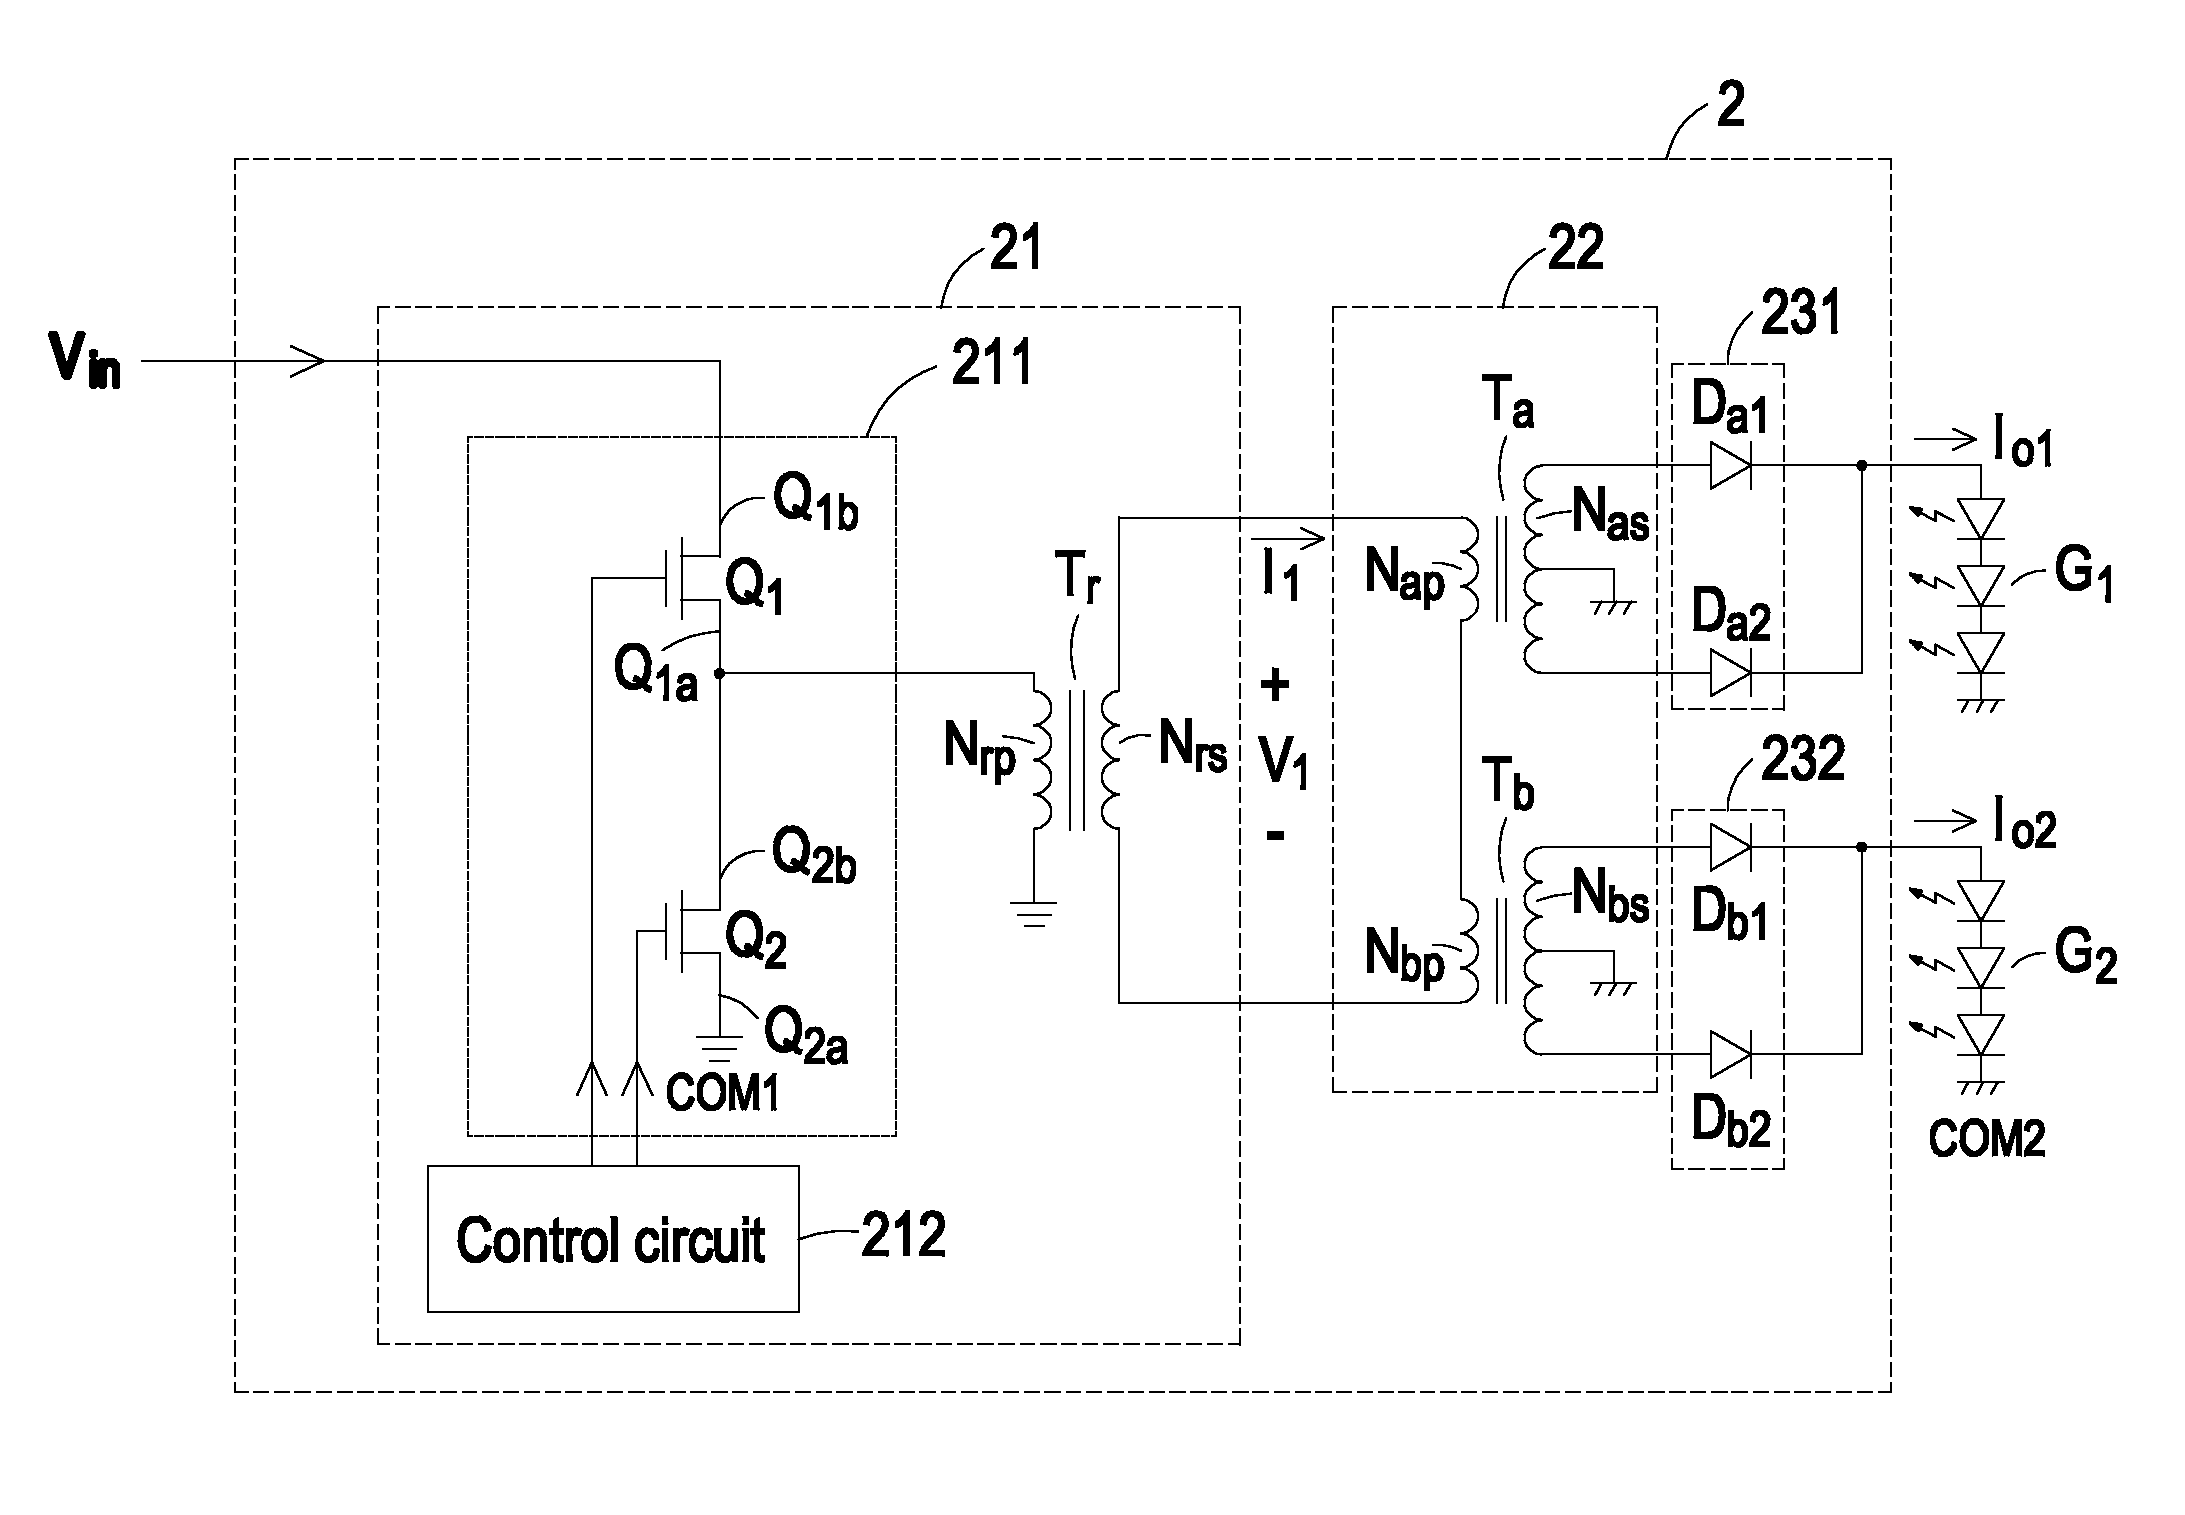 Current-sharing supply circuit for driving multiple sets of DC loads